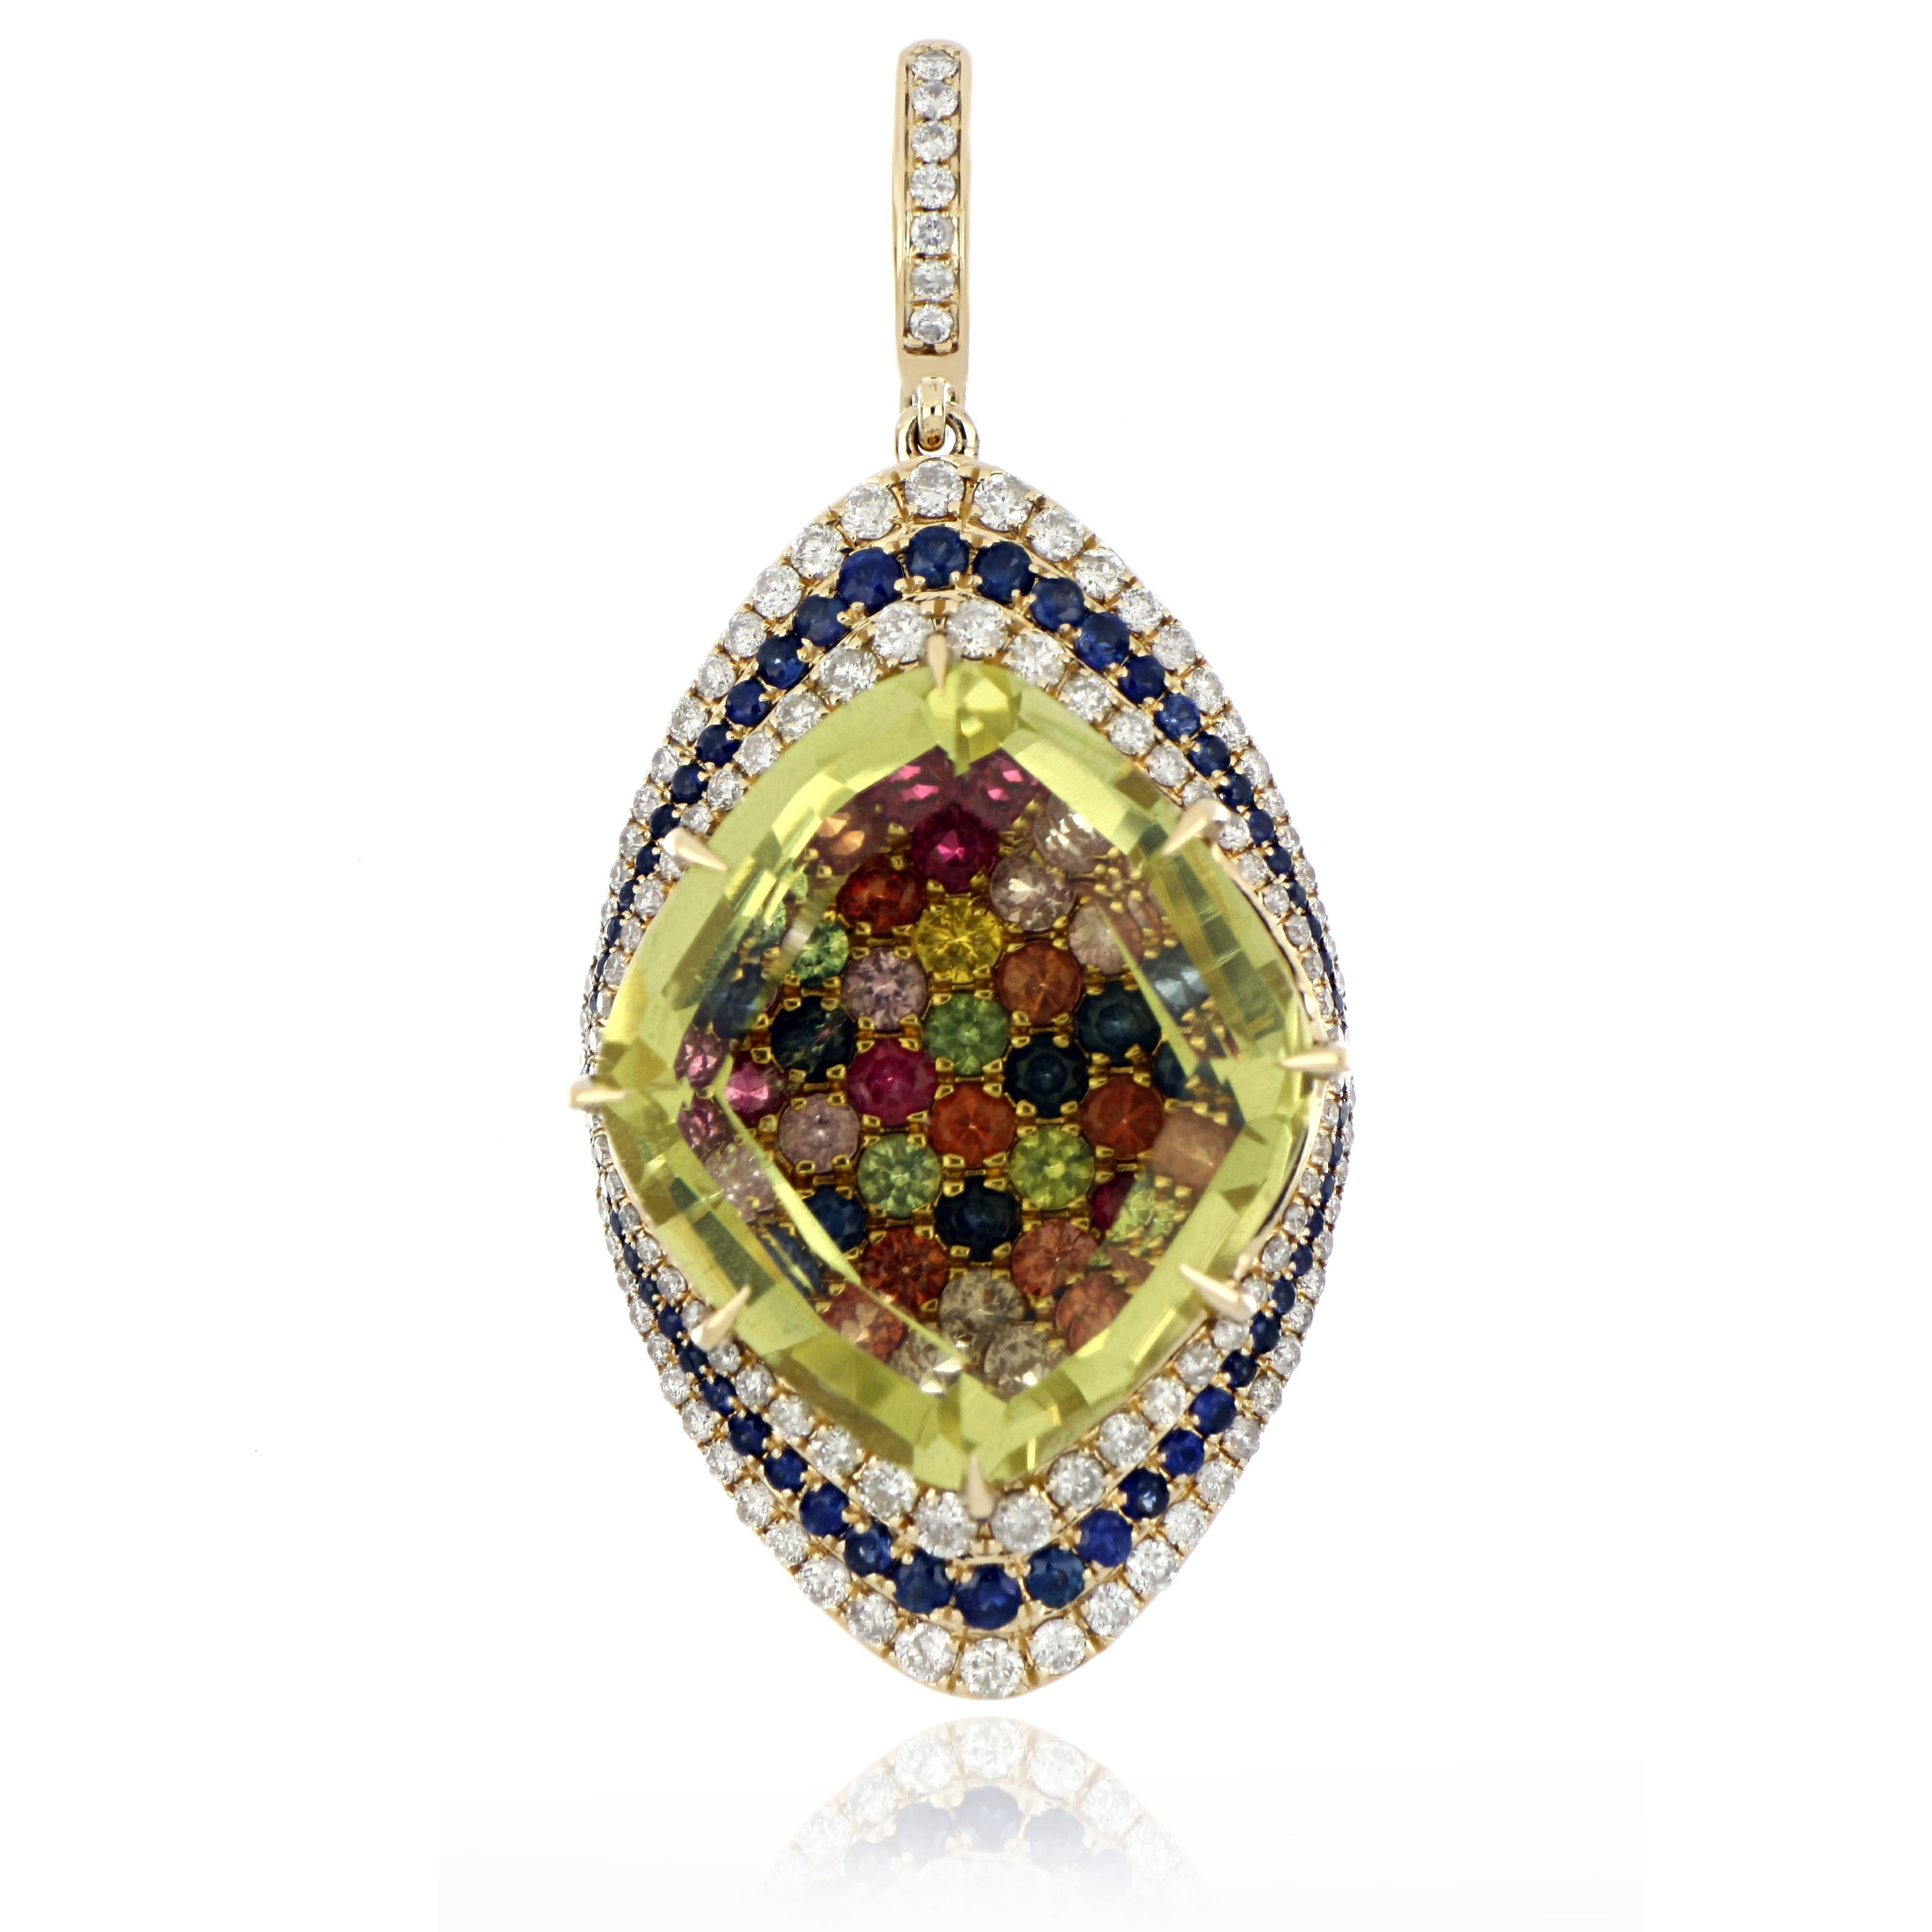 14 Karat Yellow Gold Pendant studded with Fancy Cut  15.46 Ct Lemon Quartz,  with unique under stone setting of 2.35 Ct Multi Sapphire, accented with 0.38 Cts Blue Sapphire and 0.62 Cts Diamonds, hand crafted in 14 Karat Yellow Gold.

Stone